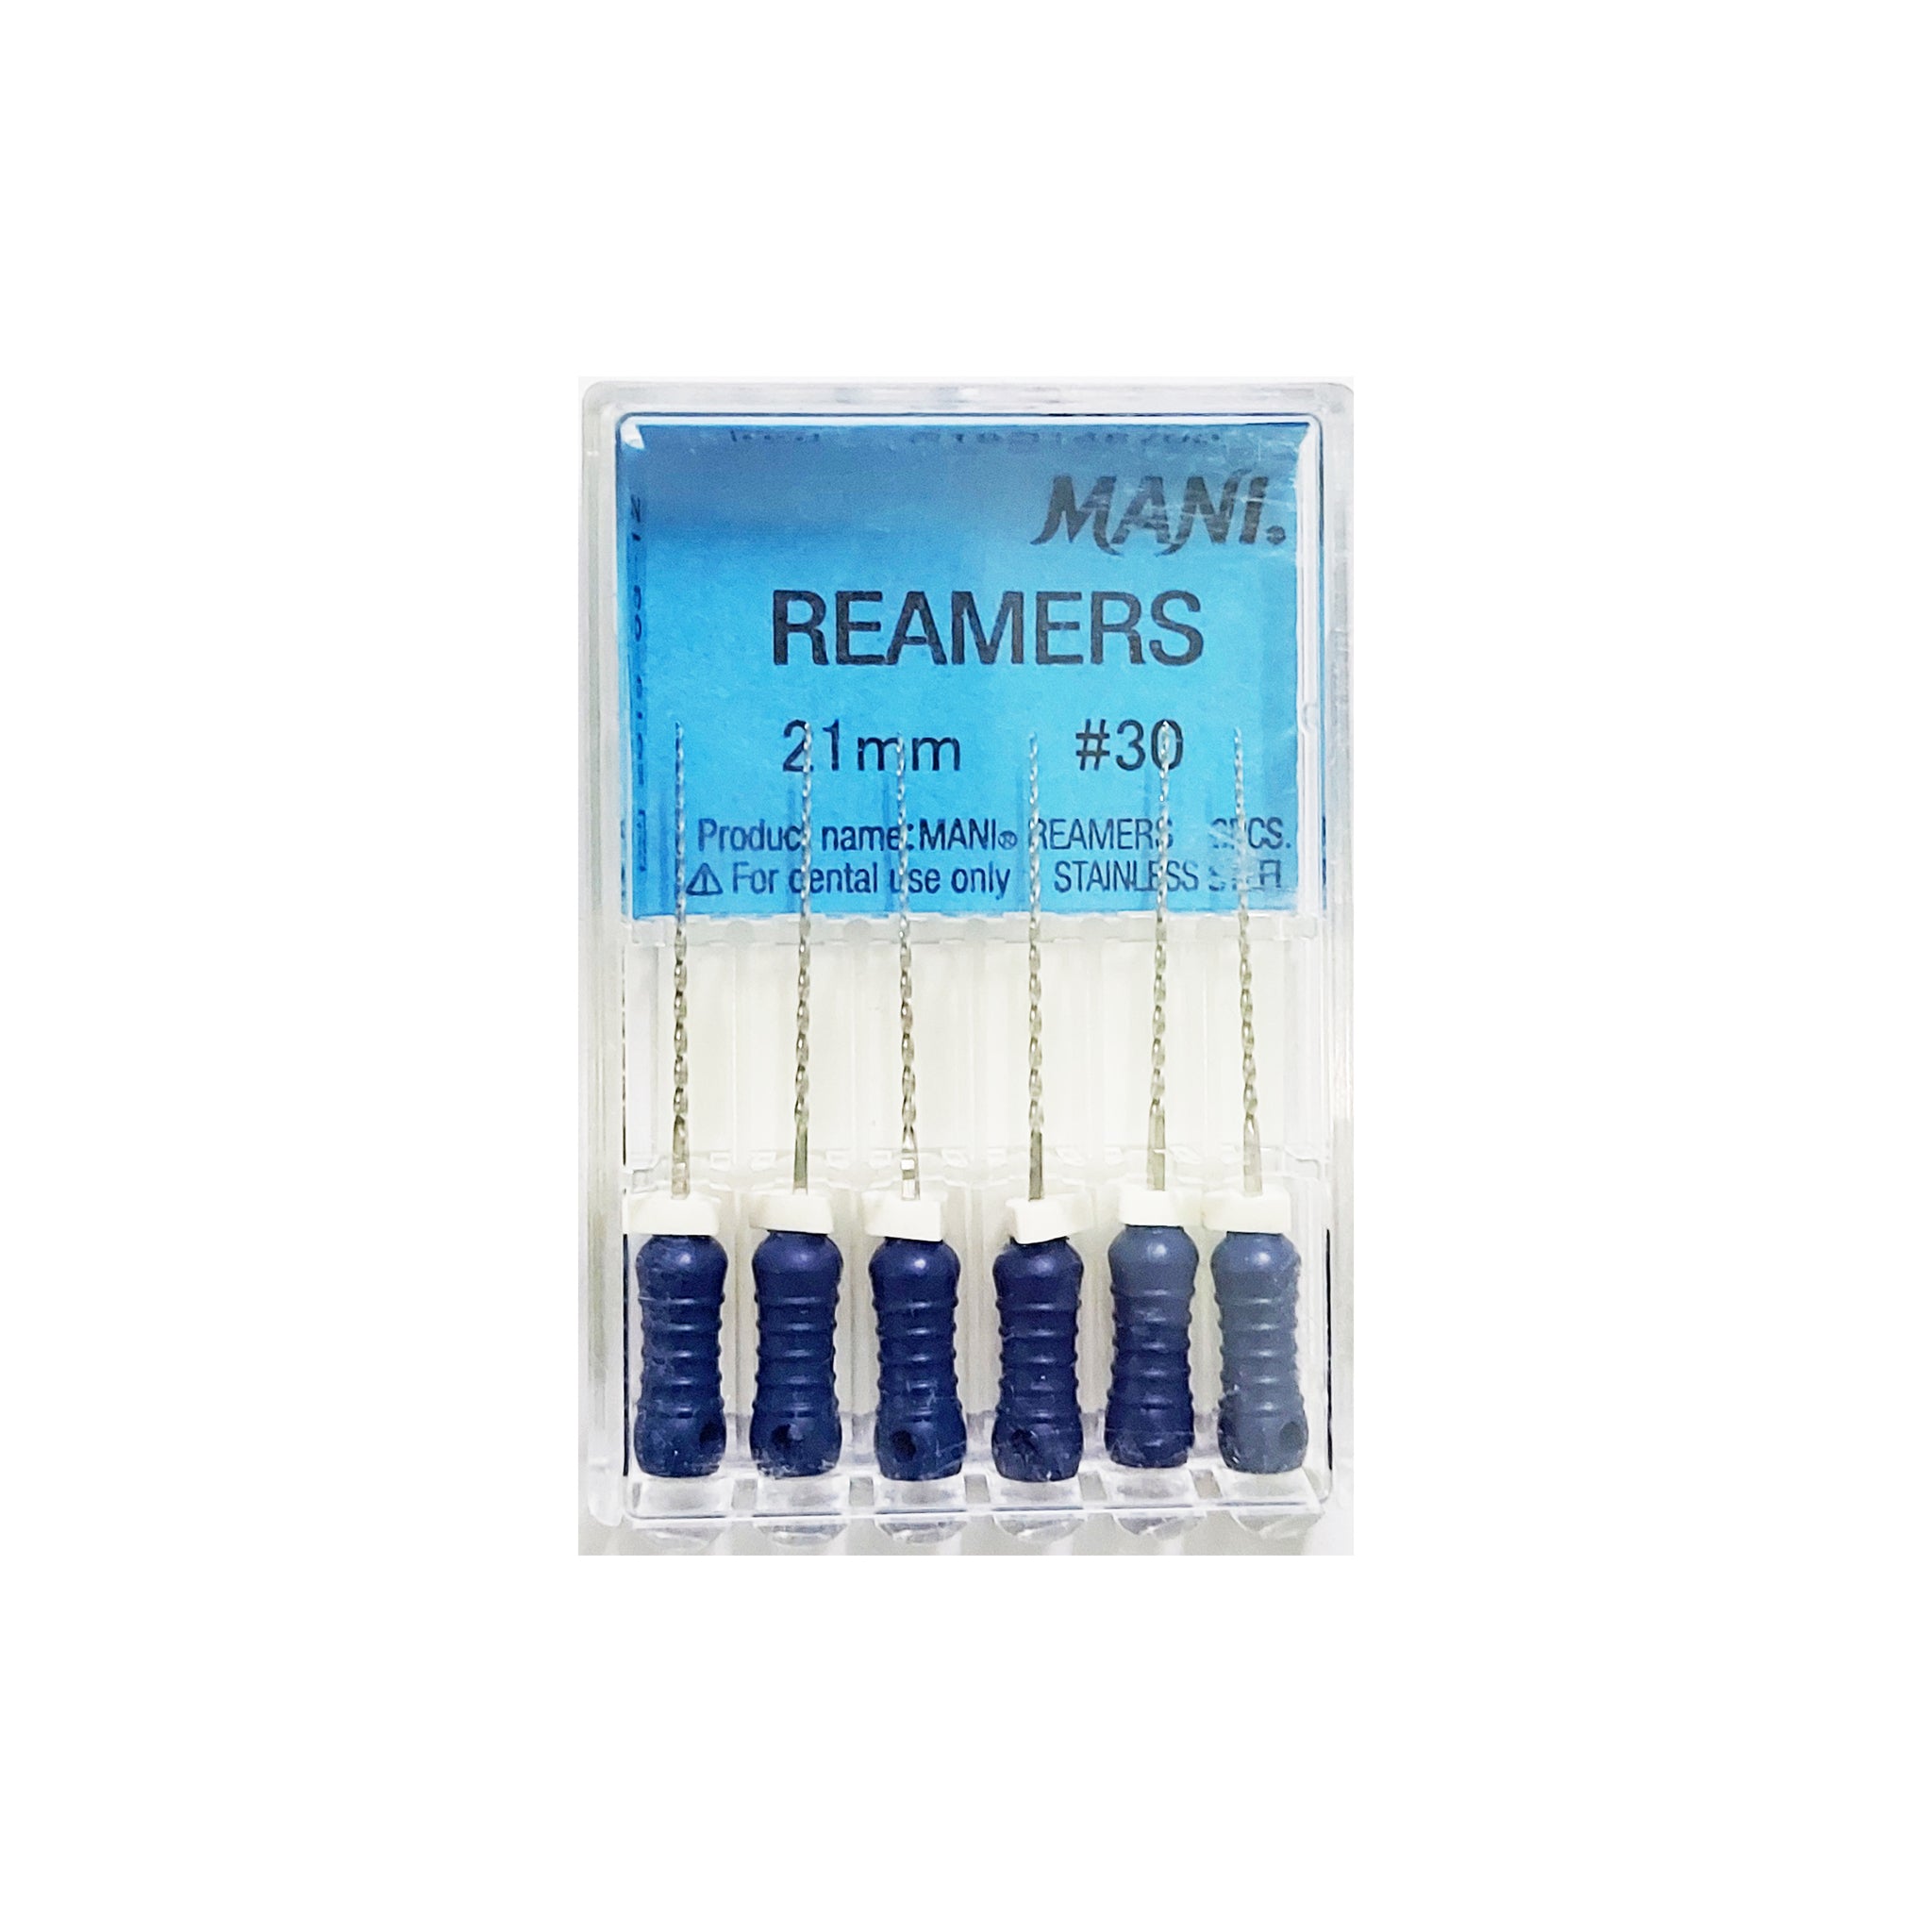 Mani Reamers 21mm -(Pack of 6) Dental Root Canal Endodontic Files